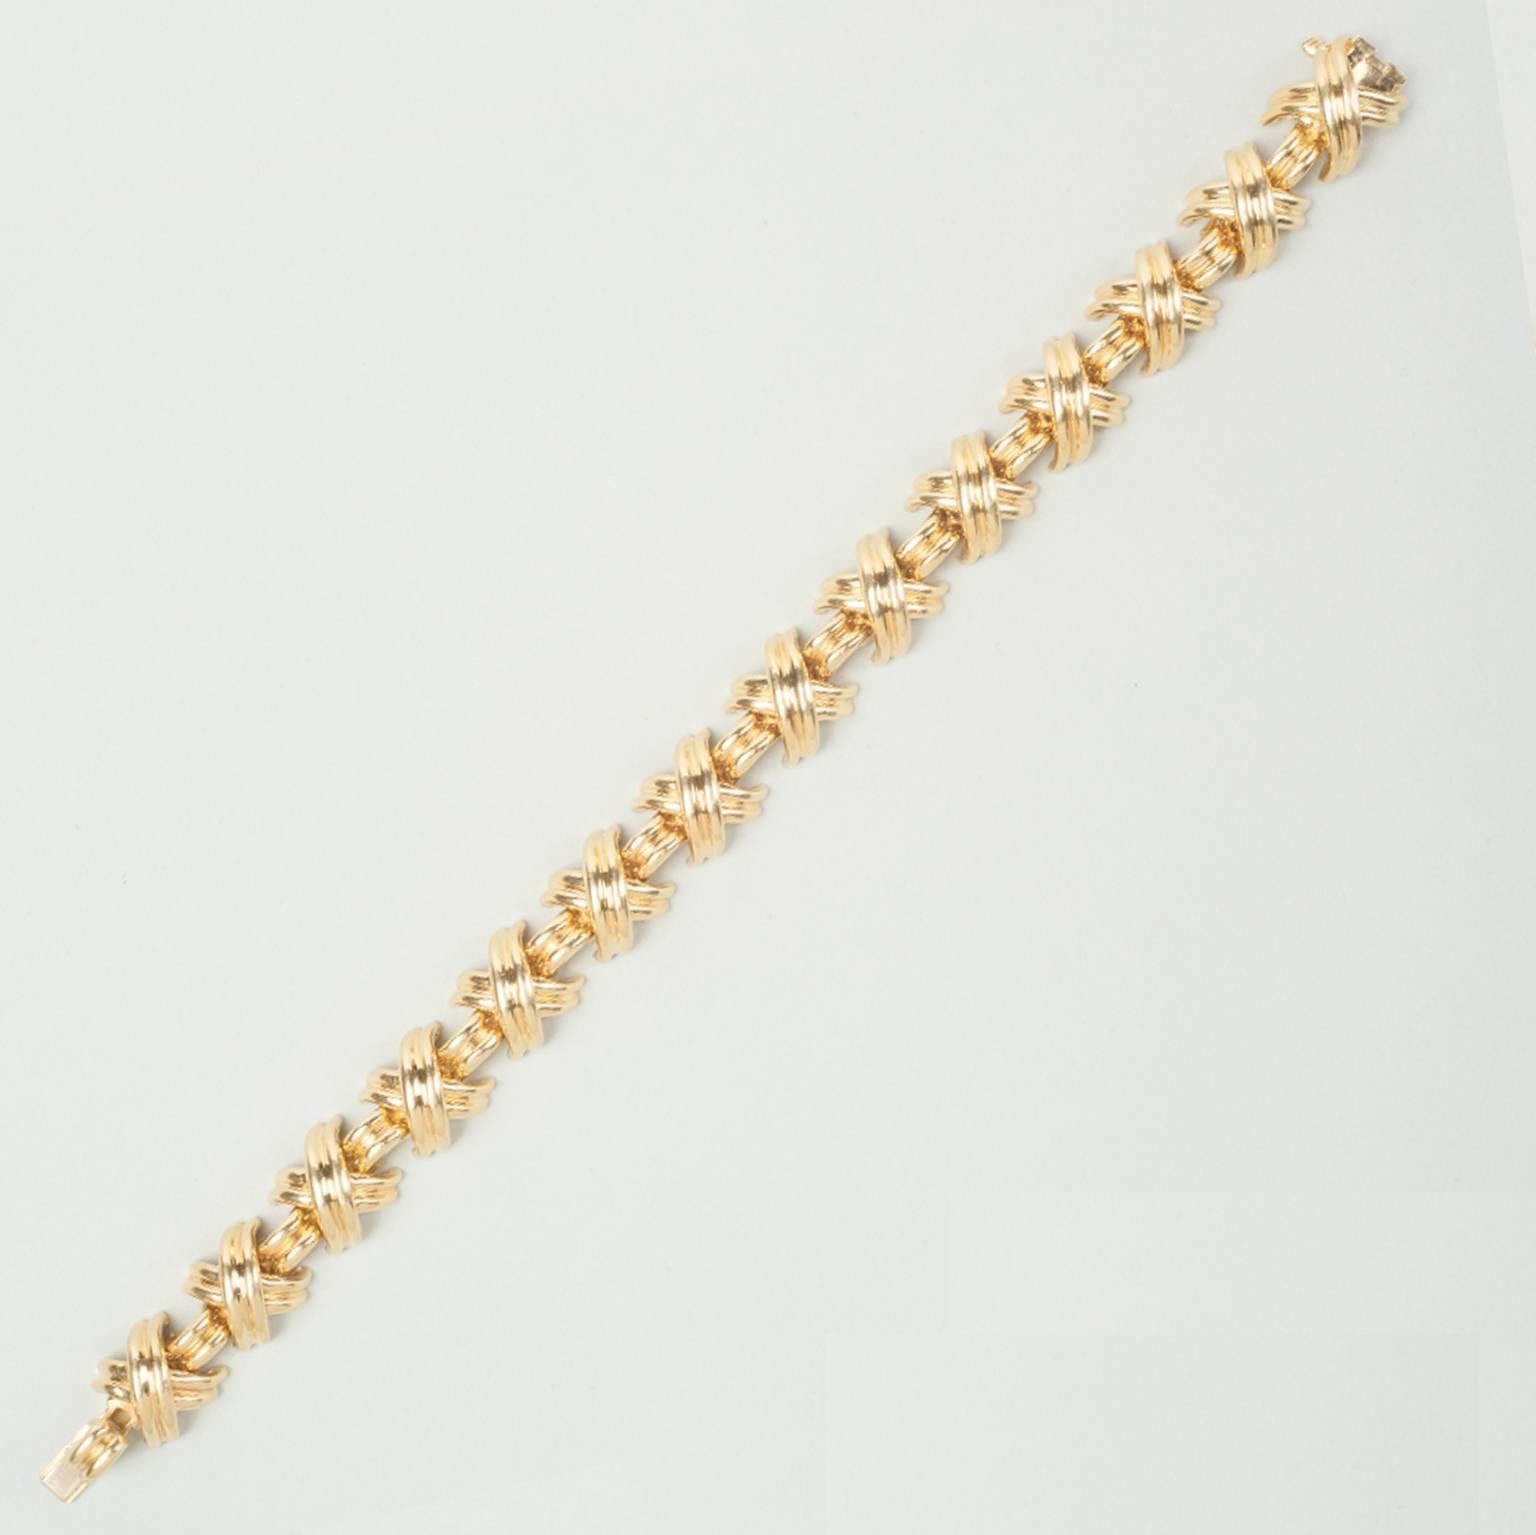 A classic 'Kisses' bracelet, designed with a series of grooved 'Kisses' links, interspaced by grooved links, to the push-piece clasp. Signed Tiffany & Co. 750.

weight: 47.9 grams
length: 18.5 cm.
width: 1.1 cm